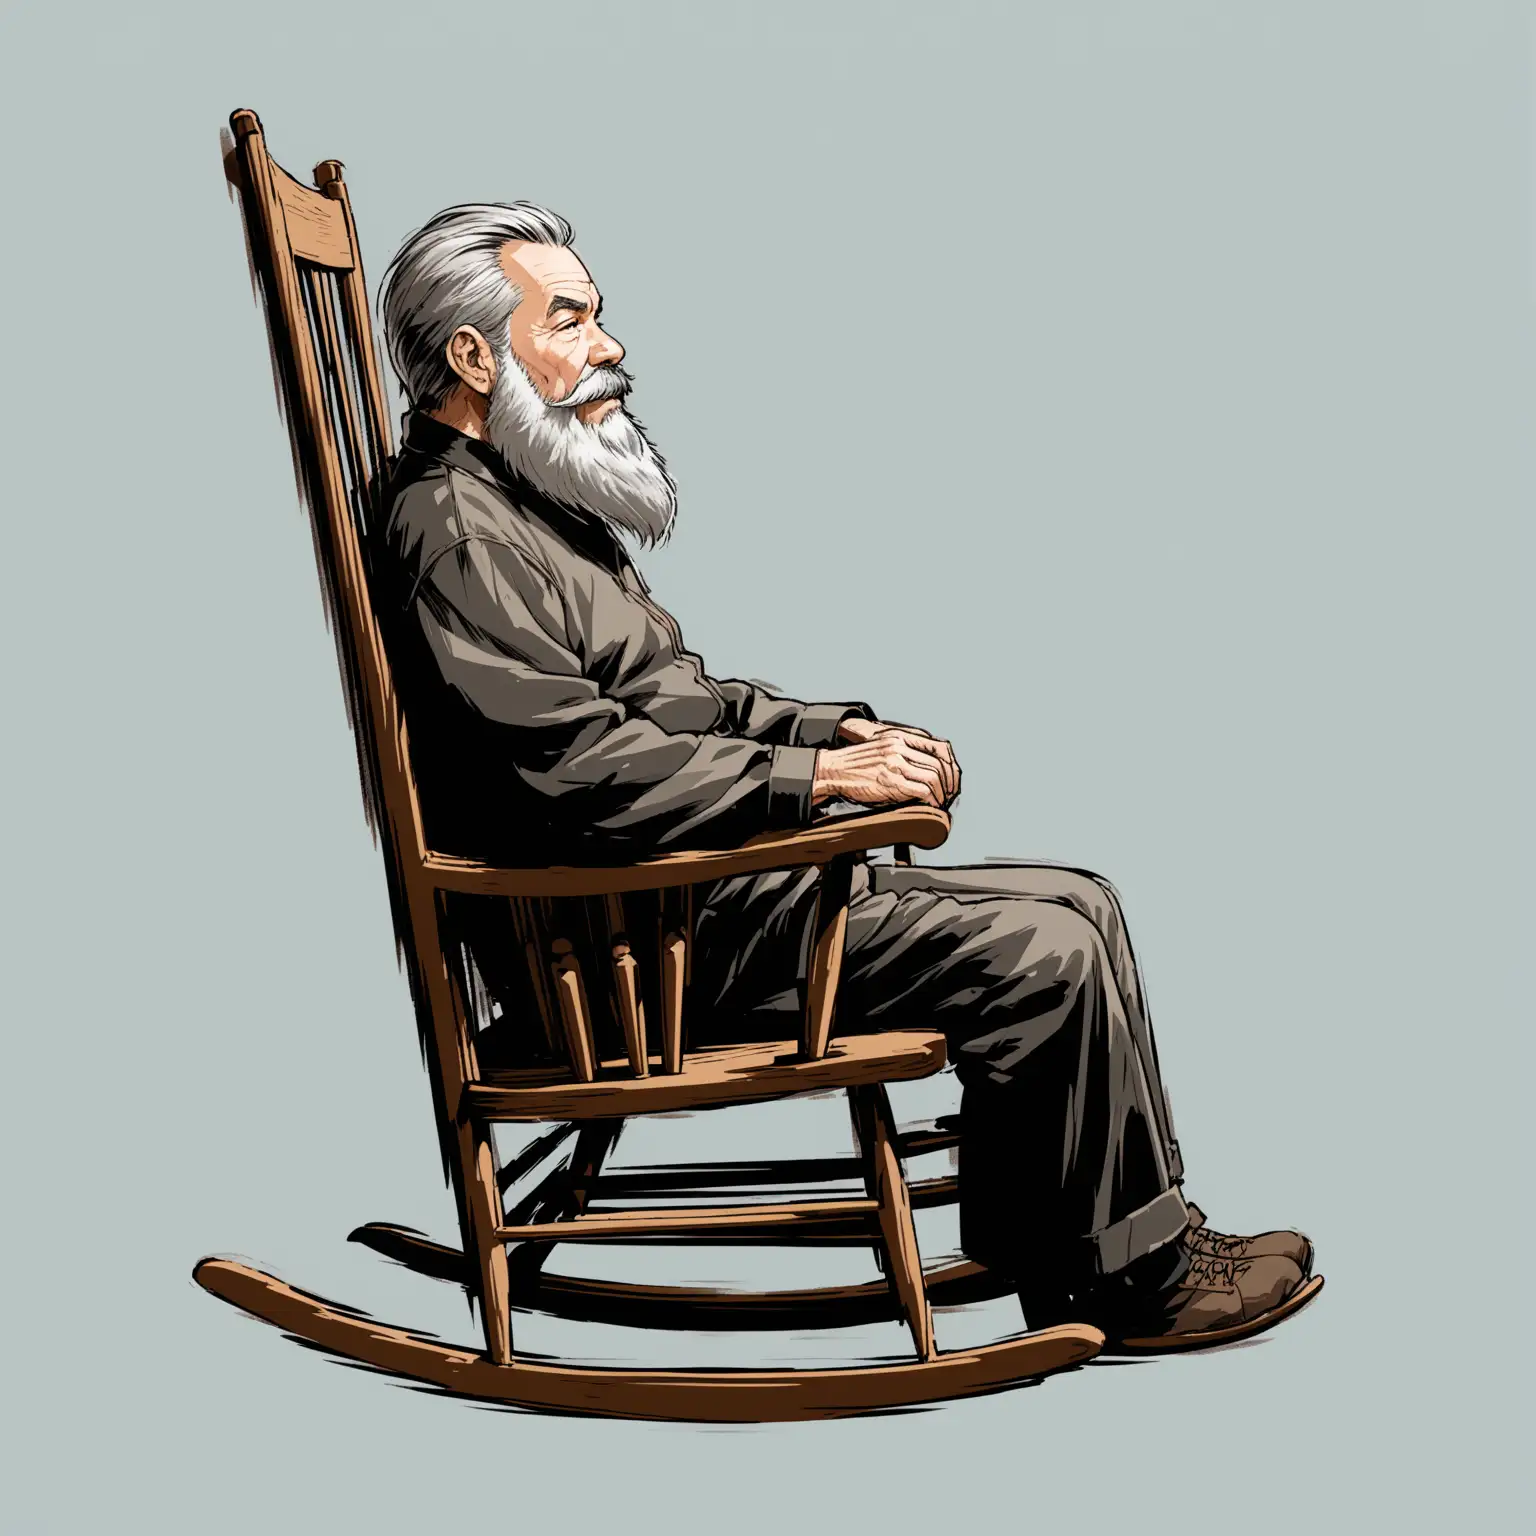 Elderly Man Relaxing in Rocking Chair with Tranquil Background